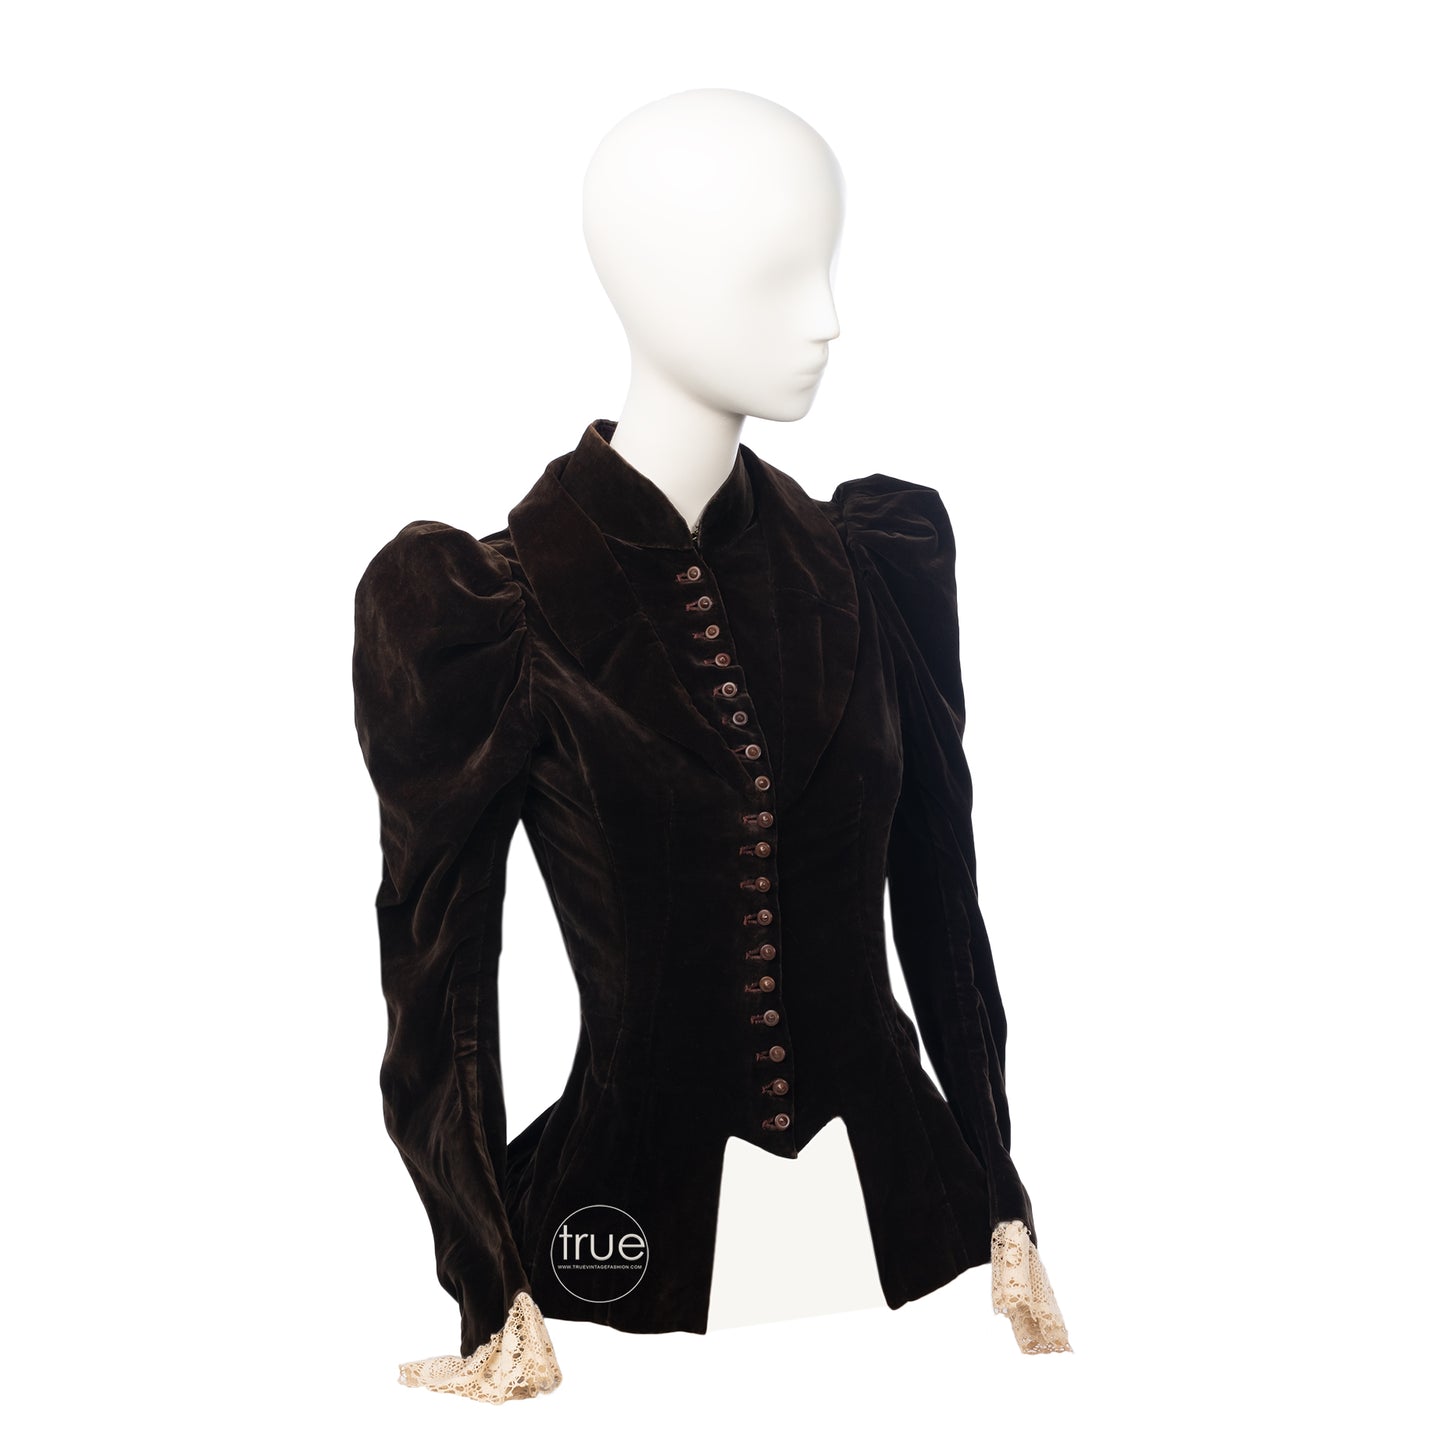 vintage 1890 - 1910 Victorian Edwardian jacket ..rich chocolate velvet with corset waist spiked buttons huge puffed sleeves and peplum